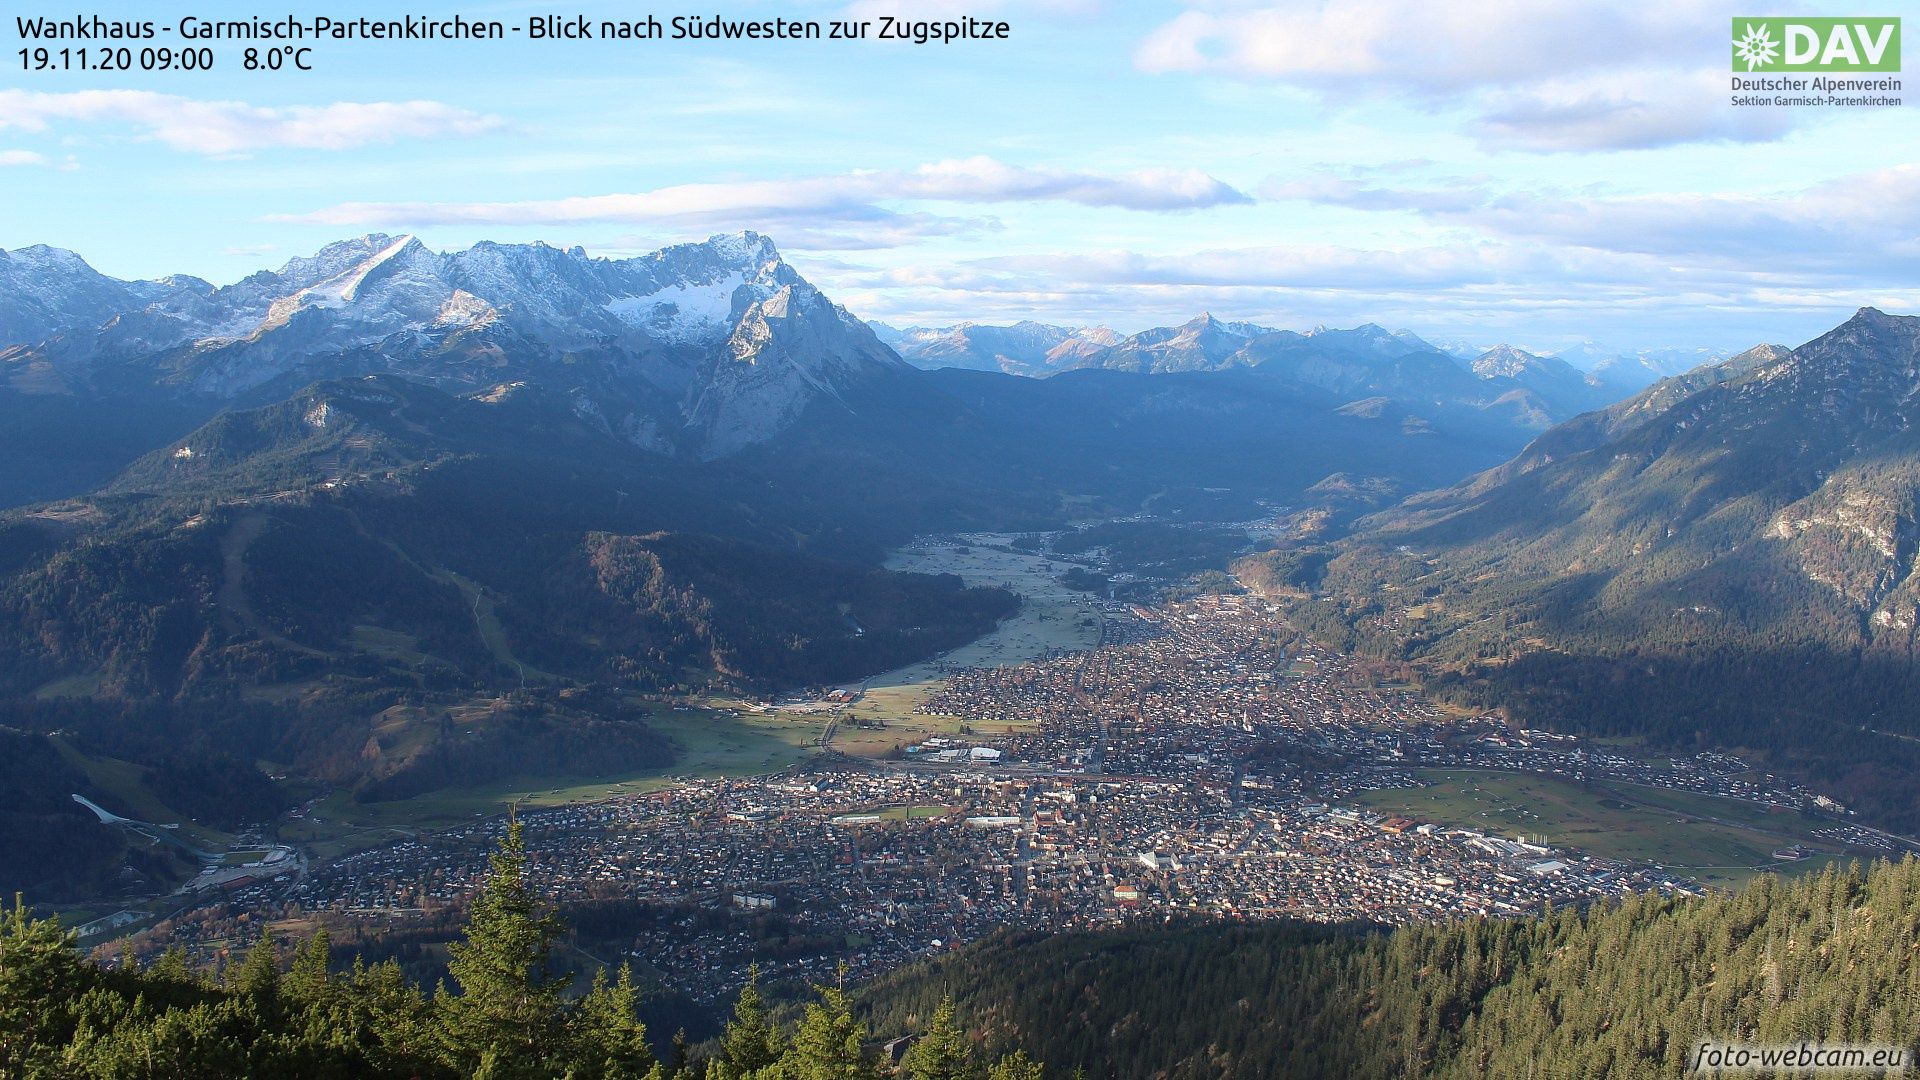 From the northwest, clouds with precipitation are moving over the Alps. The approaching cold front with clouds and precipitation is also visible here in Garmisch